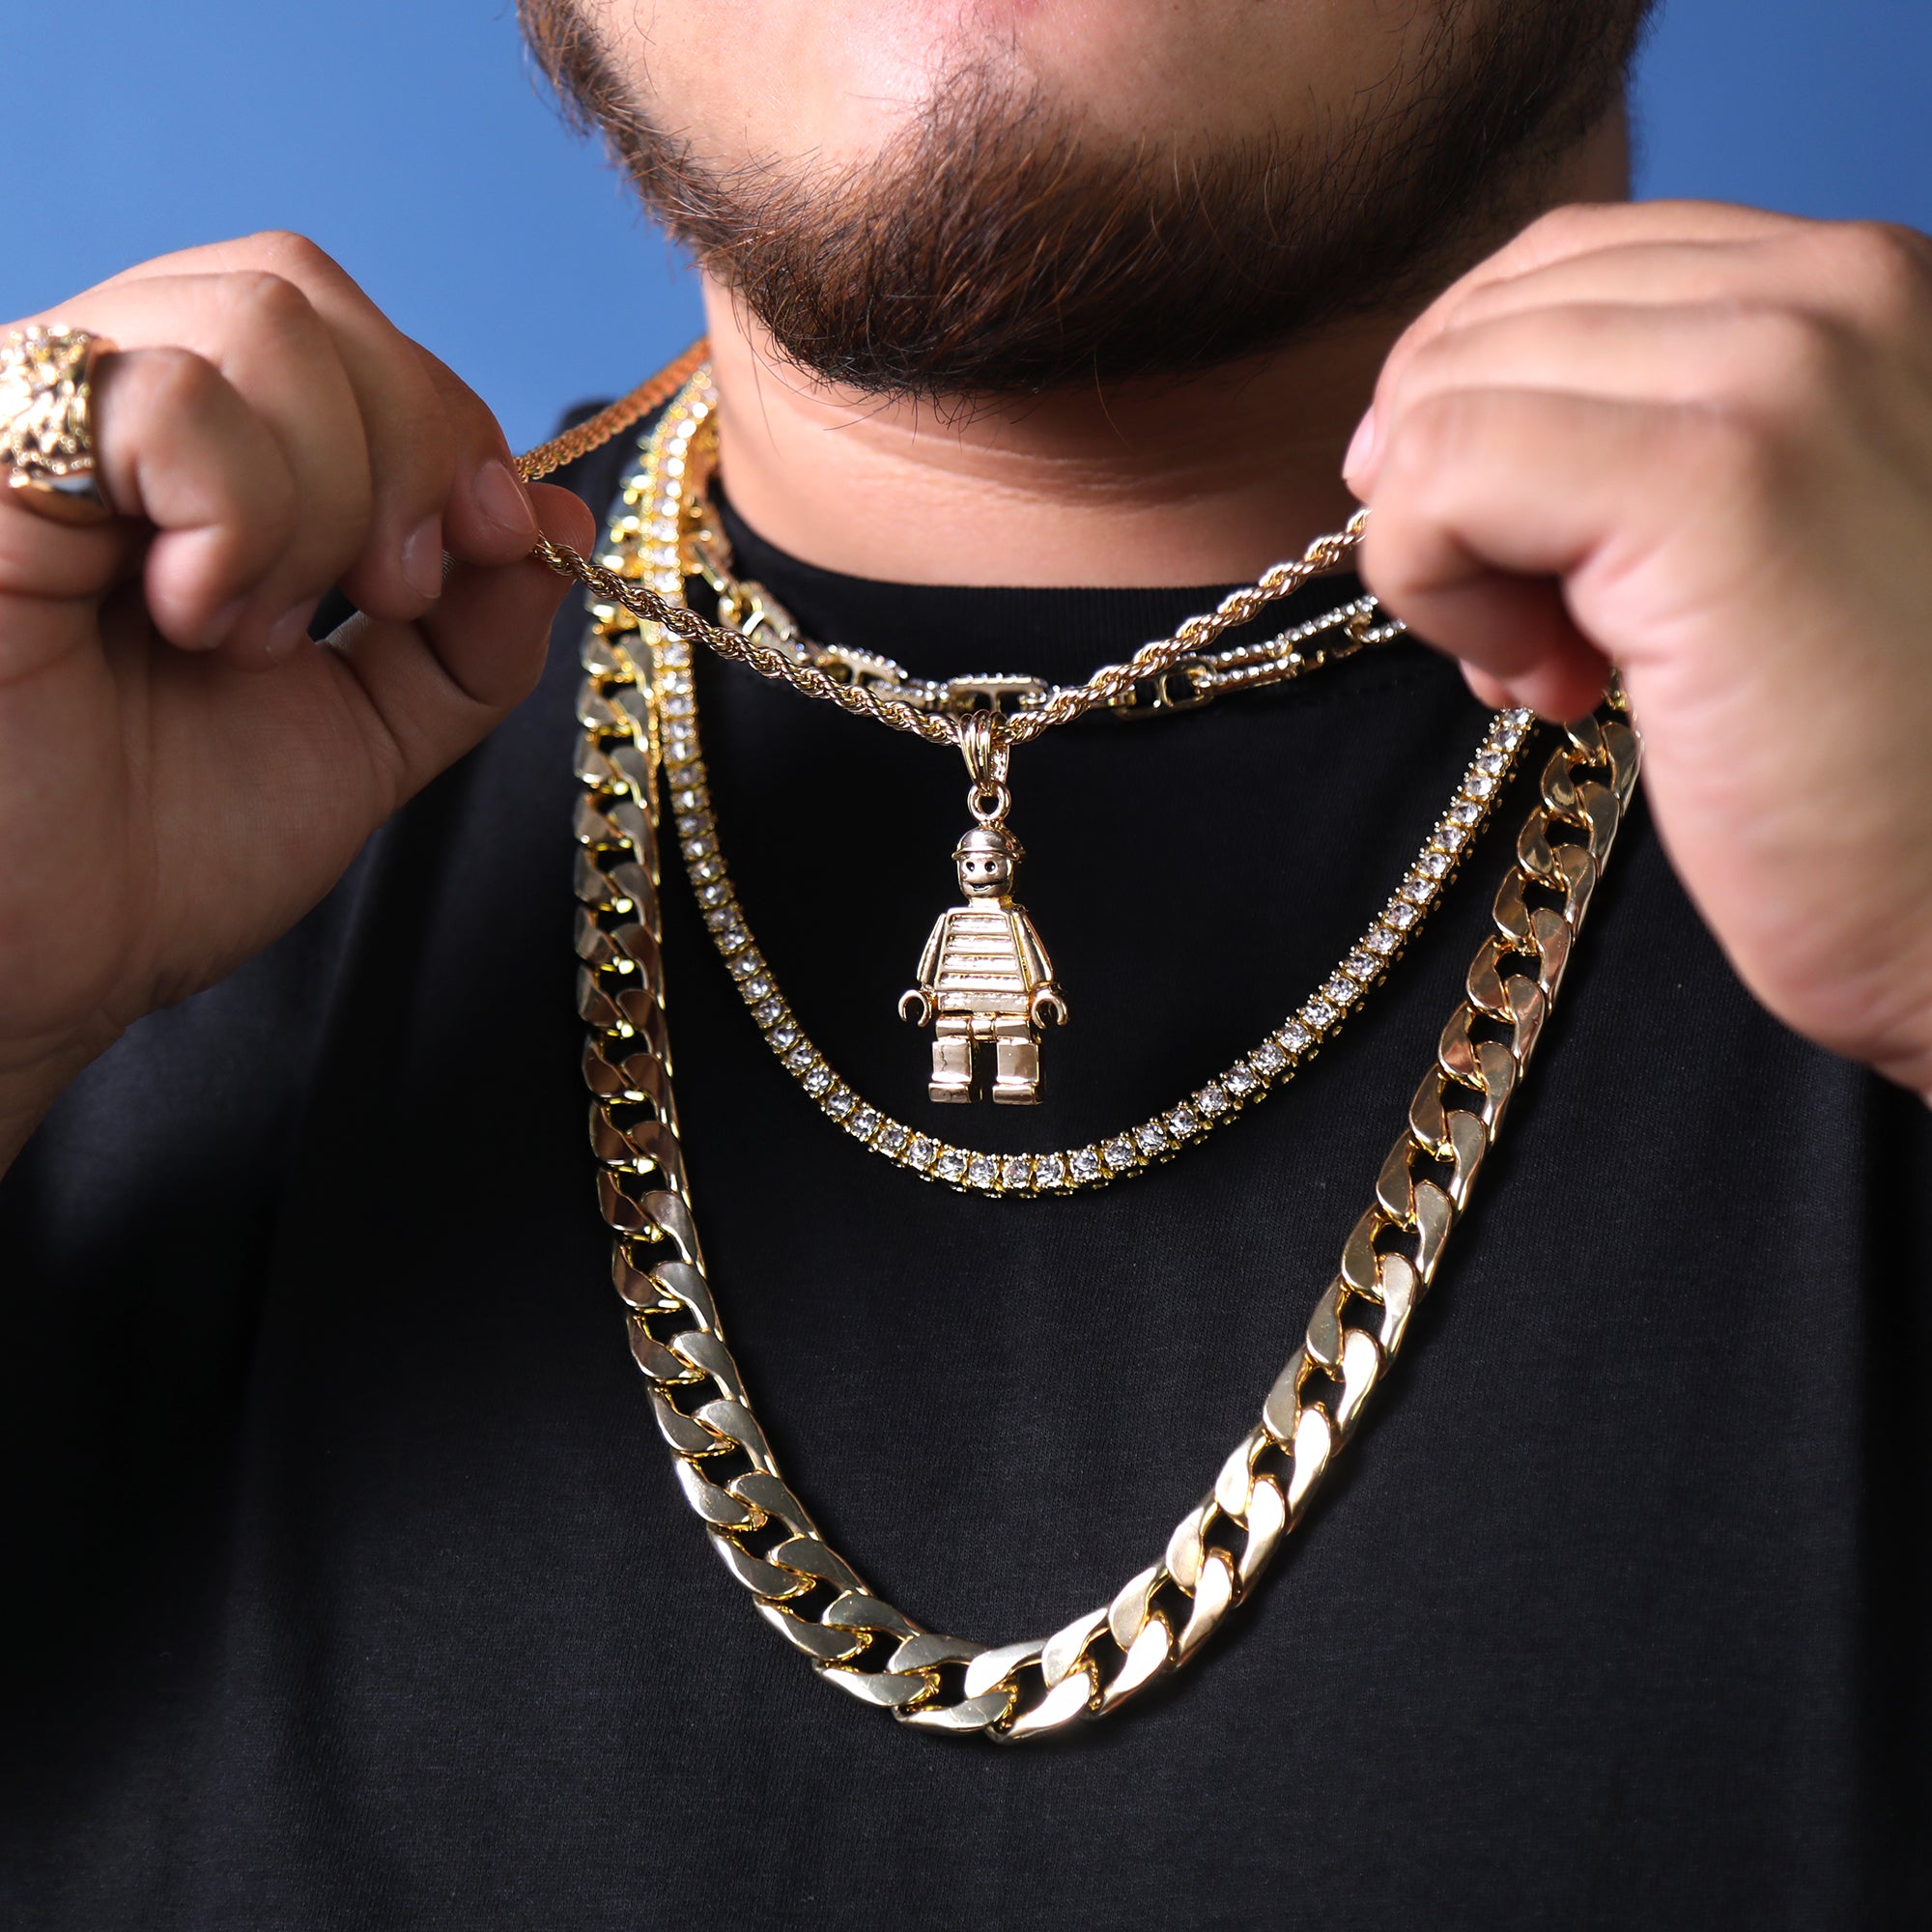 Lil Go Man Pendant 18K 24" Rope Chain Hip Hop Jewelry